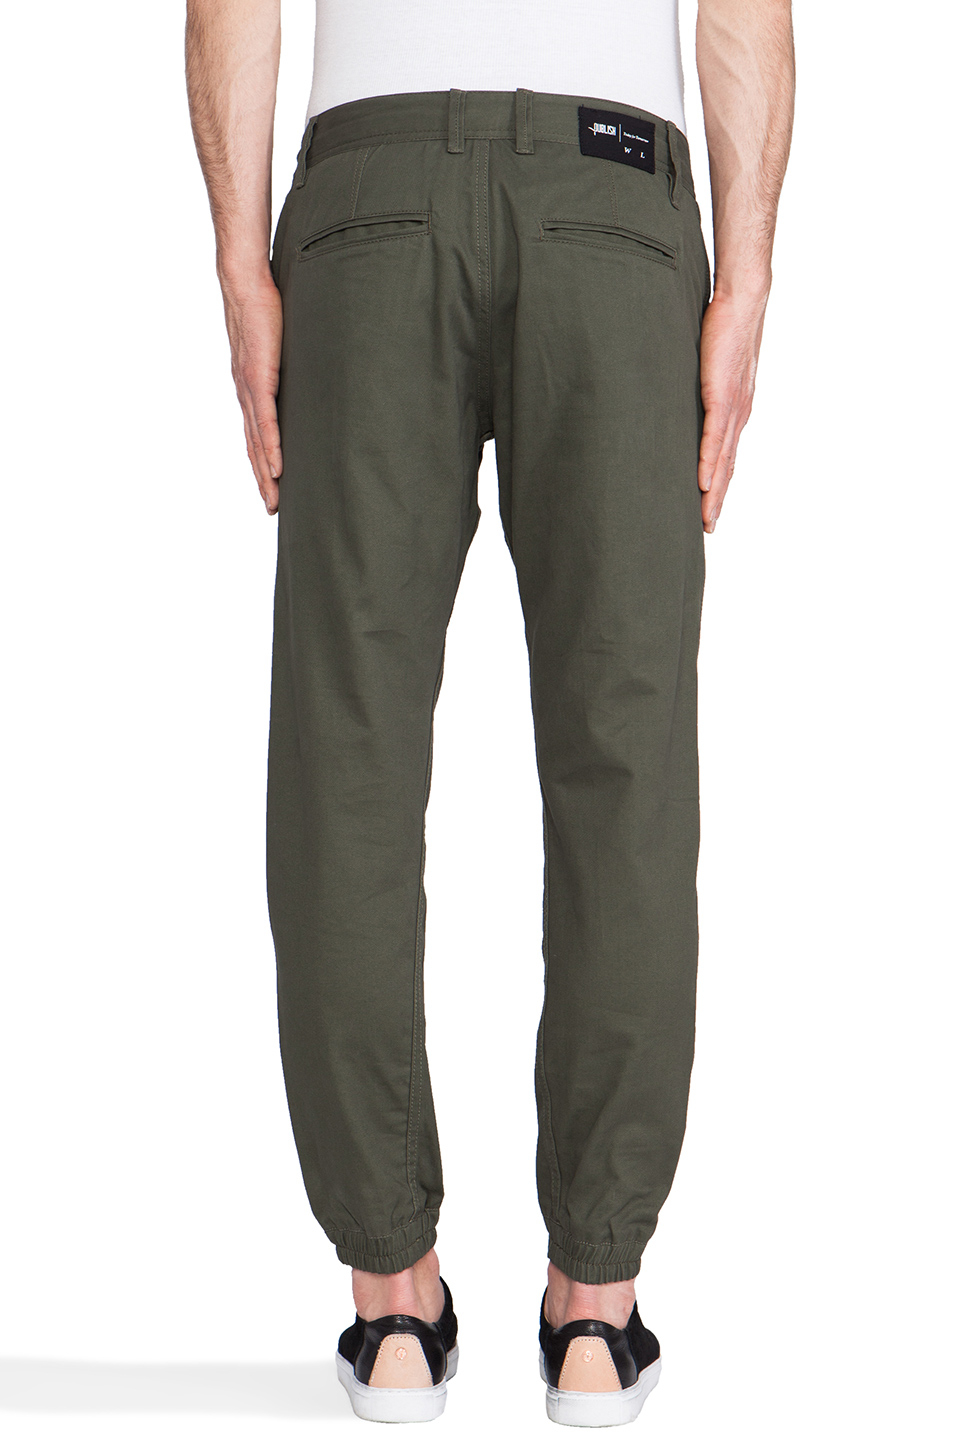 Timberland Jogger in Olive (Green) for Men - Lyst